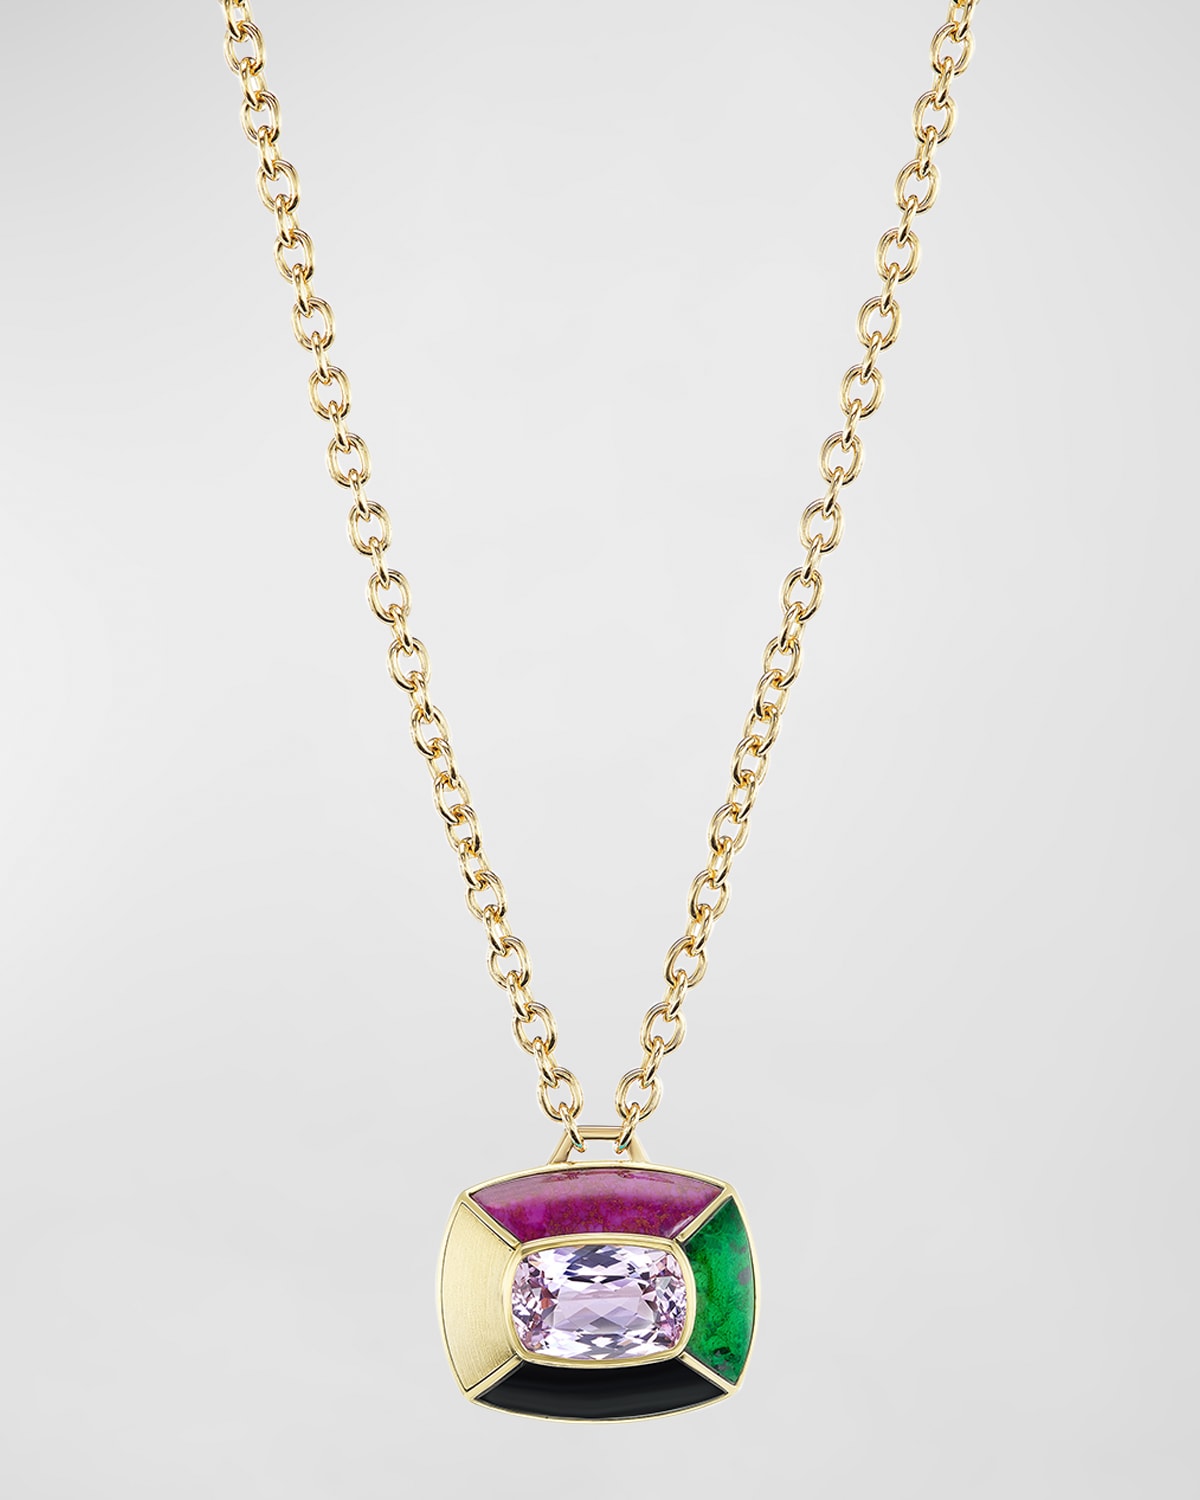 Mini Patchwork Necklace in 18K Yellow Gold and Kuzite